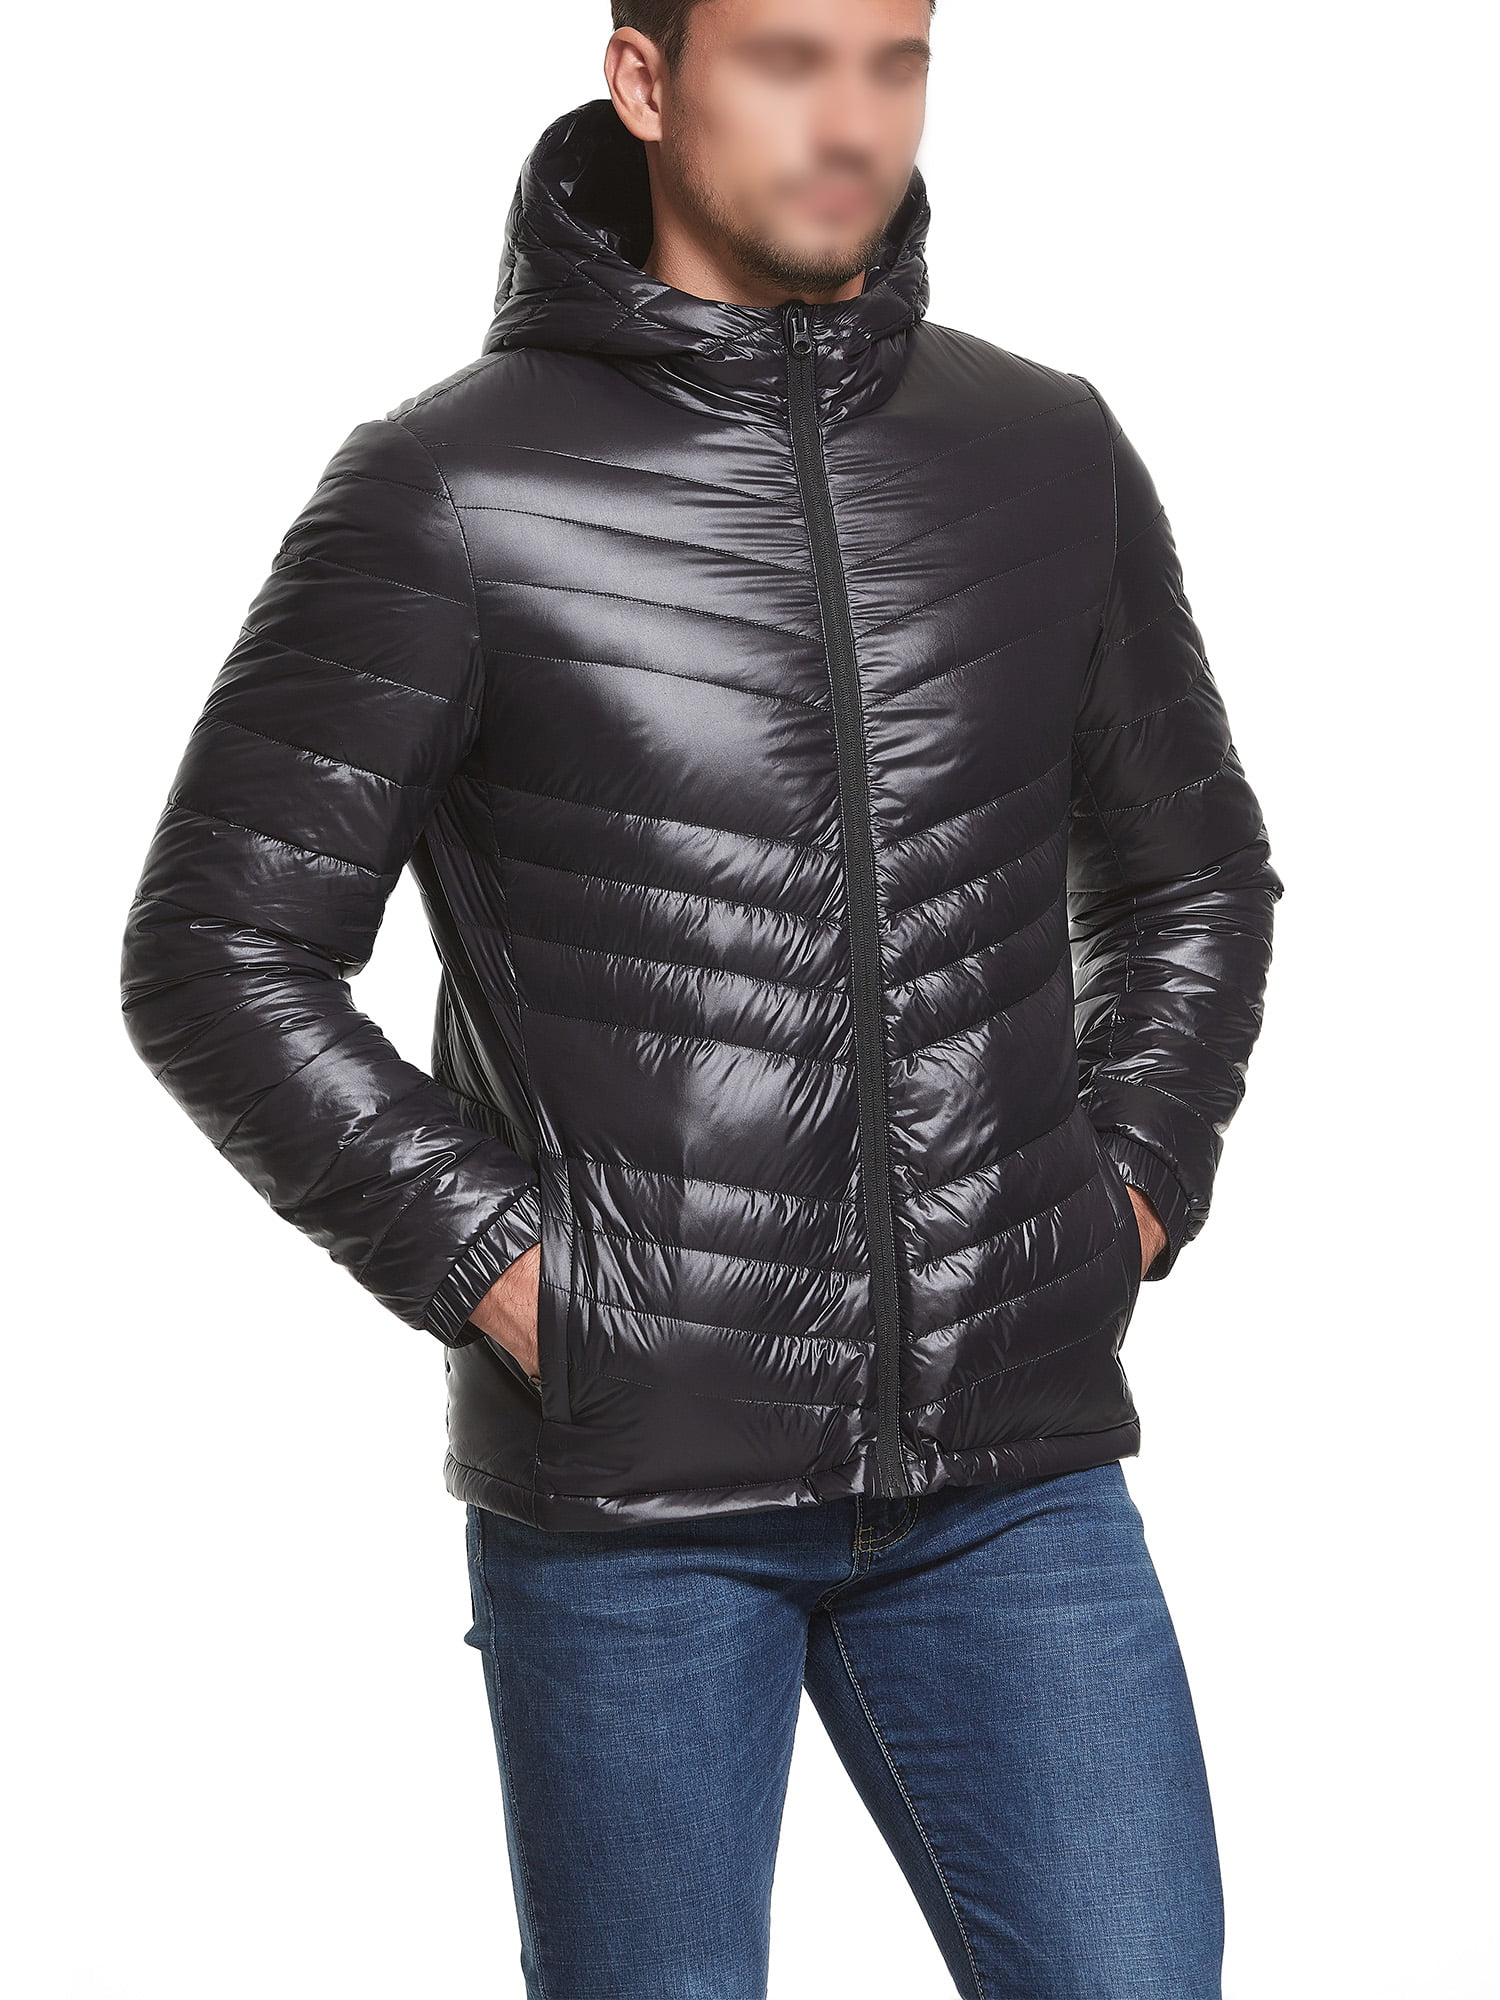 Mens Shiny down jacket Tide Brand Quilted Outerwear Lightweight Hooded coat with Side Pockets Outdoor Winter Down Coats for Travel Hiking Climbing Skiing Casual 